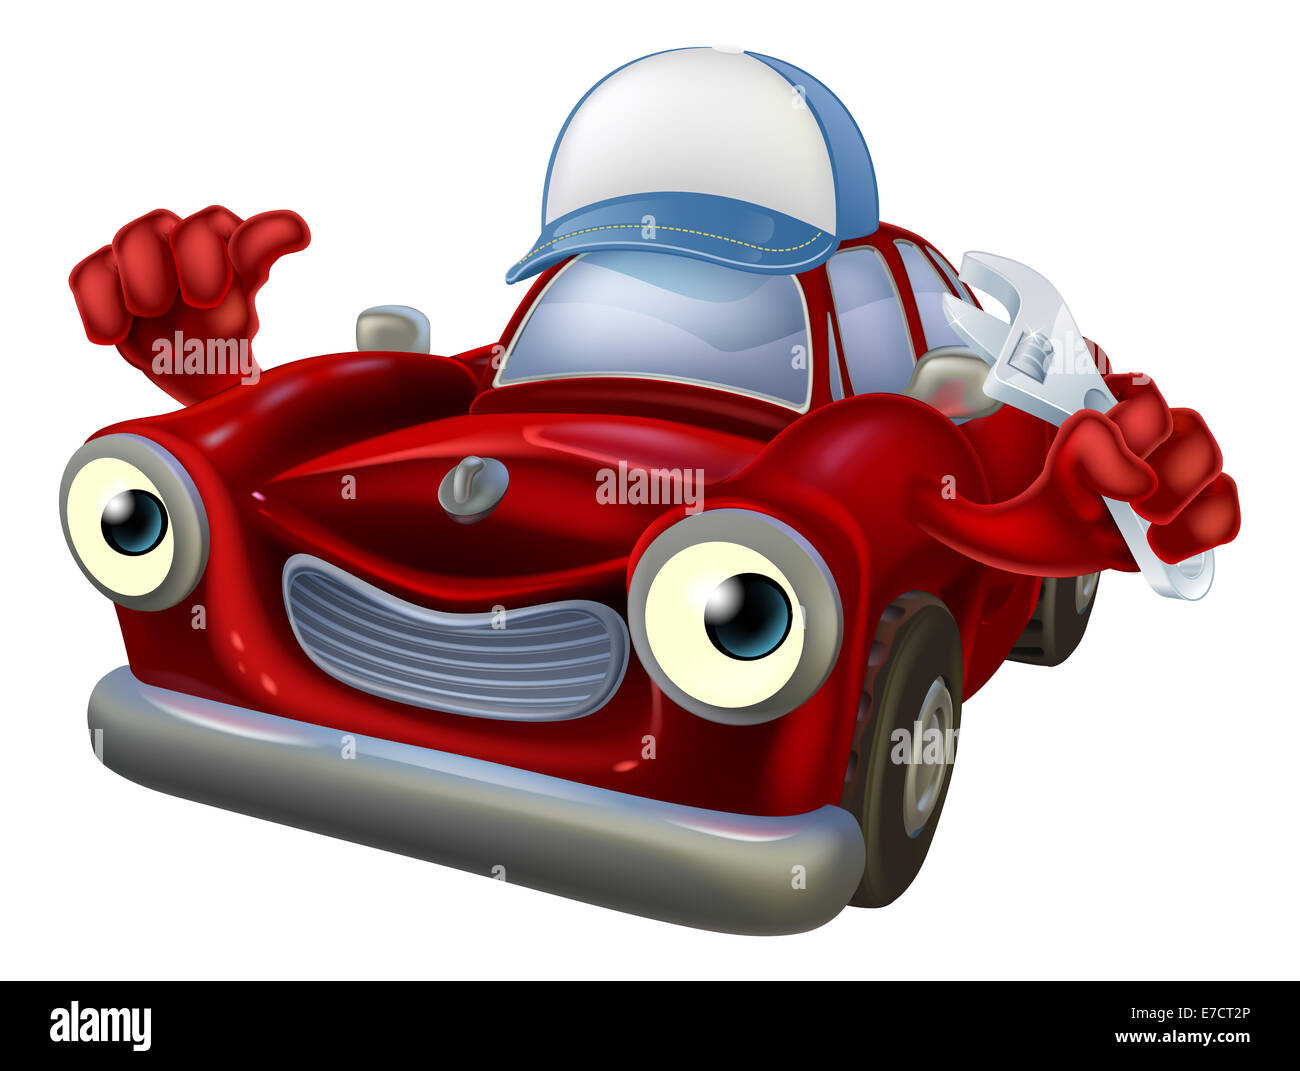 An illustration of a red cartoon car character wearing a baseball cap hat and holding a spanner while giving a thumbs up. Stock Photo